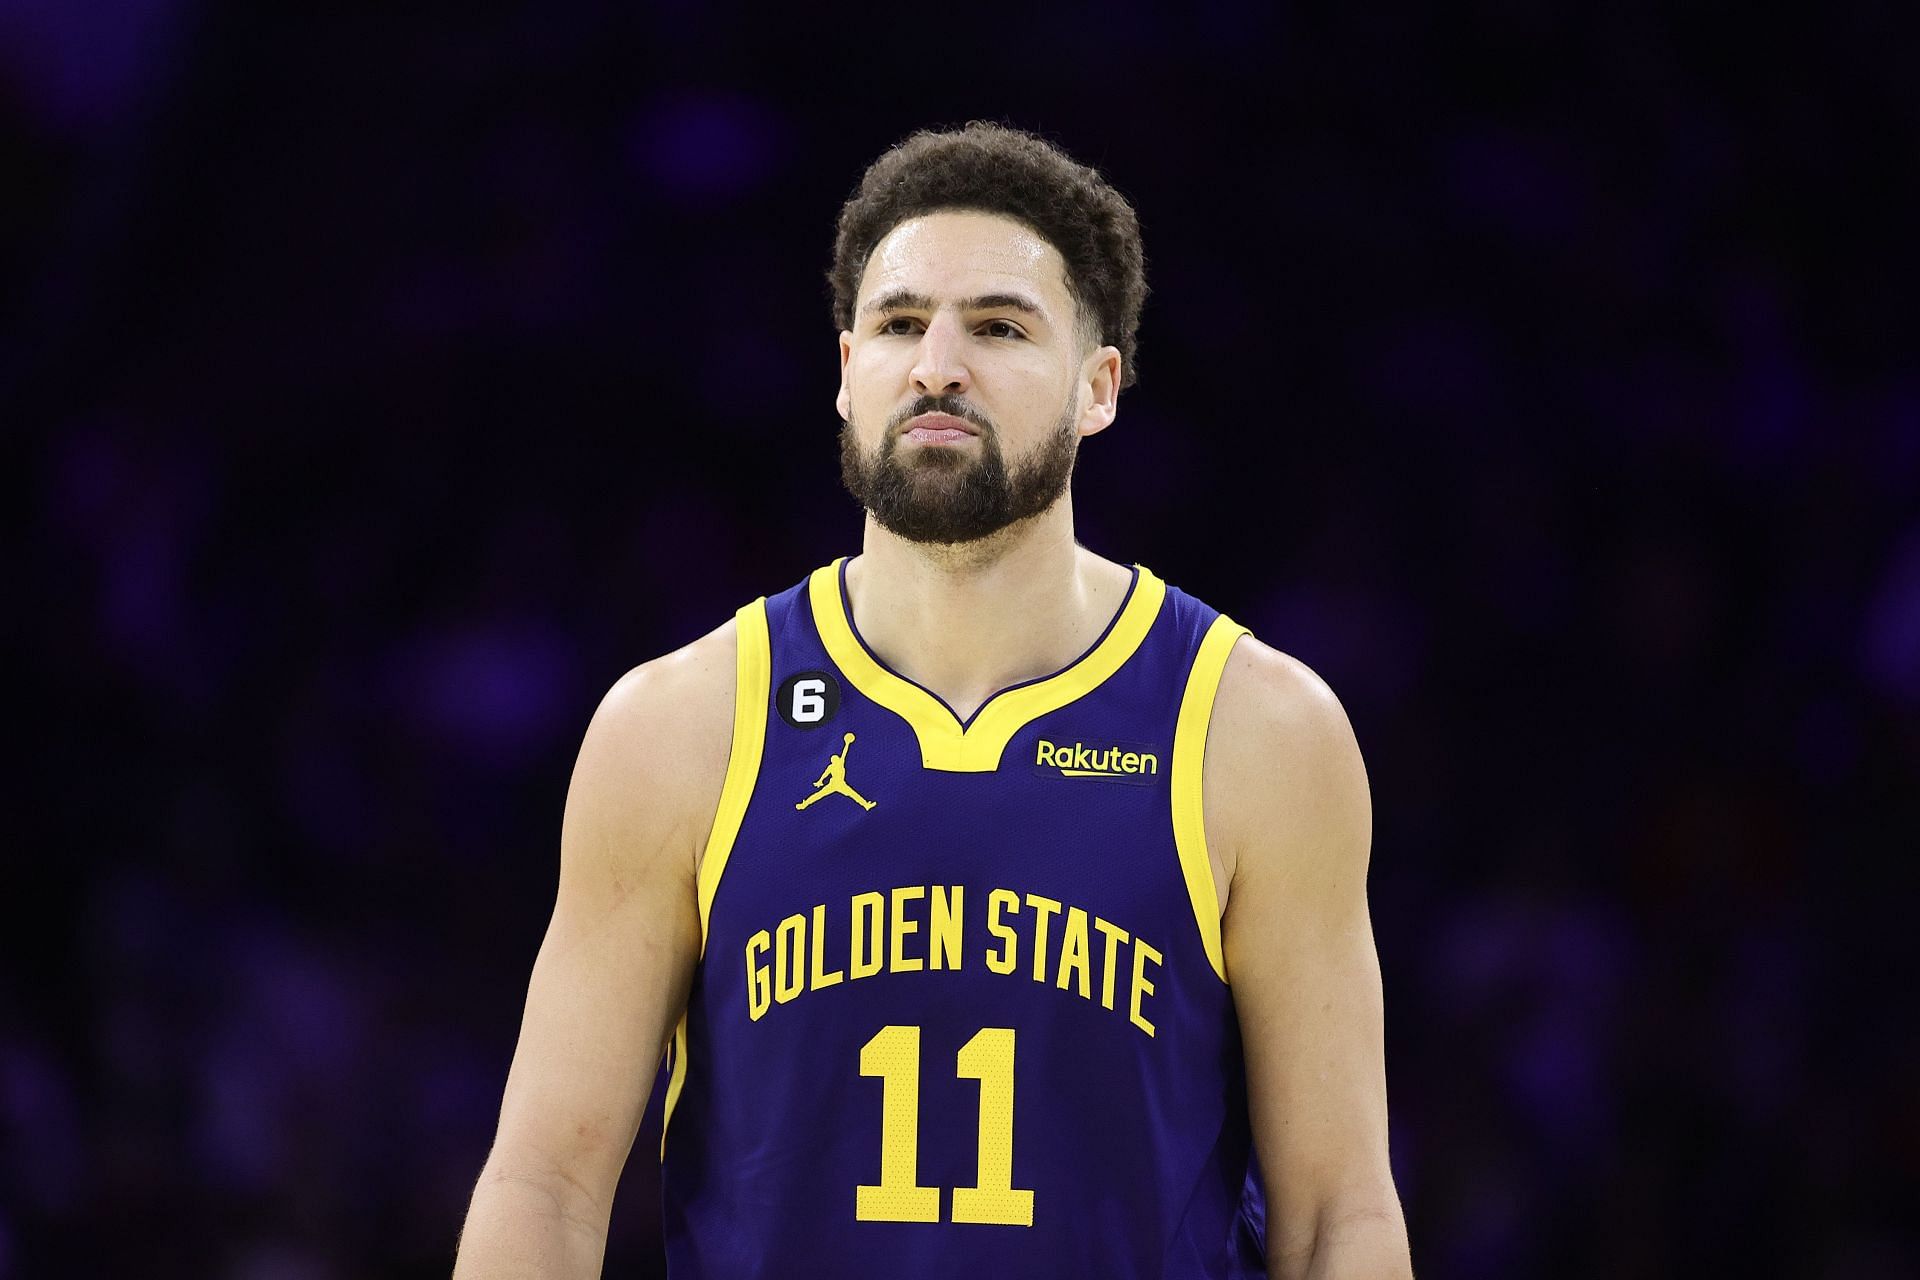 It's a goal of mine: Klay Thompson aims to return to All-Star